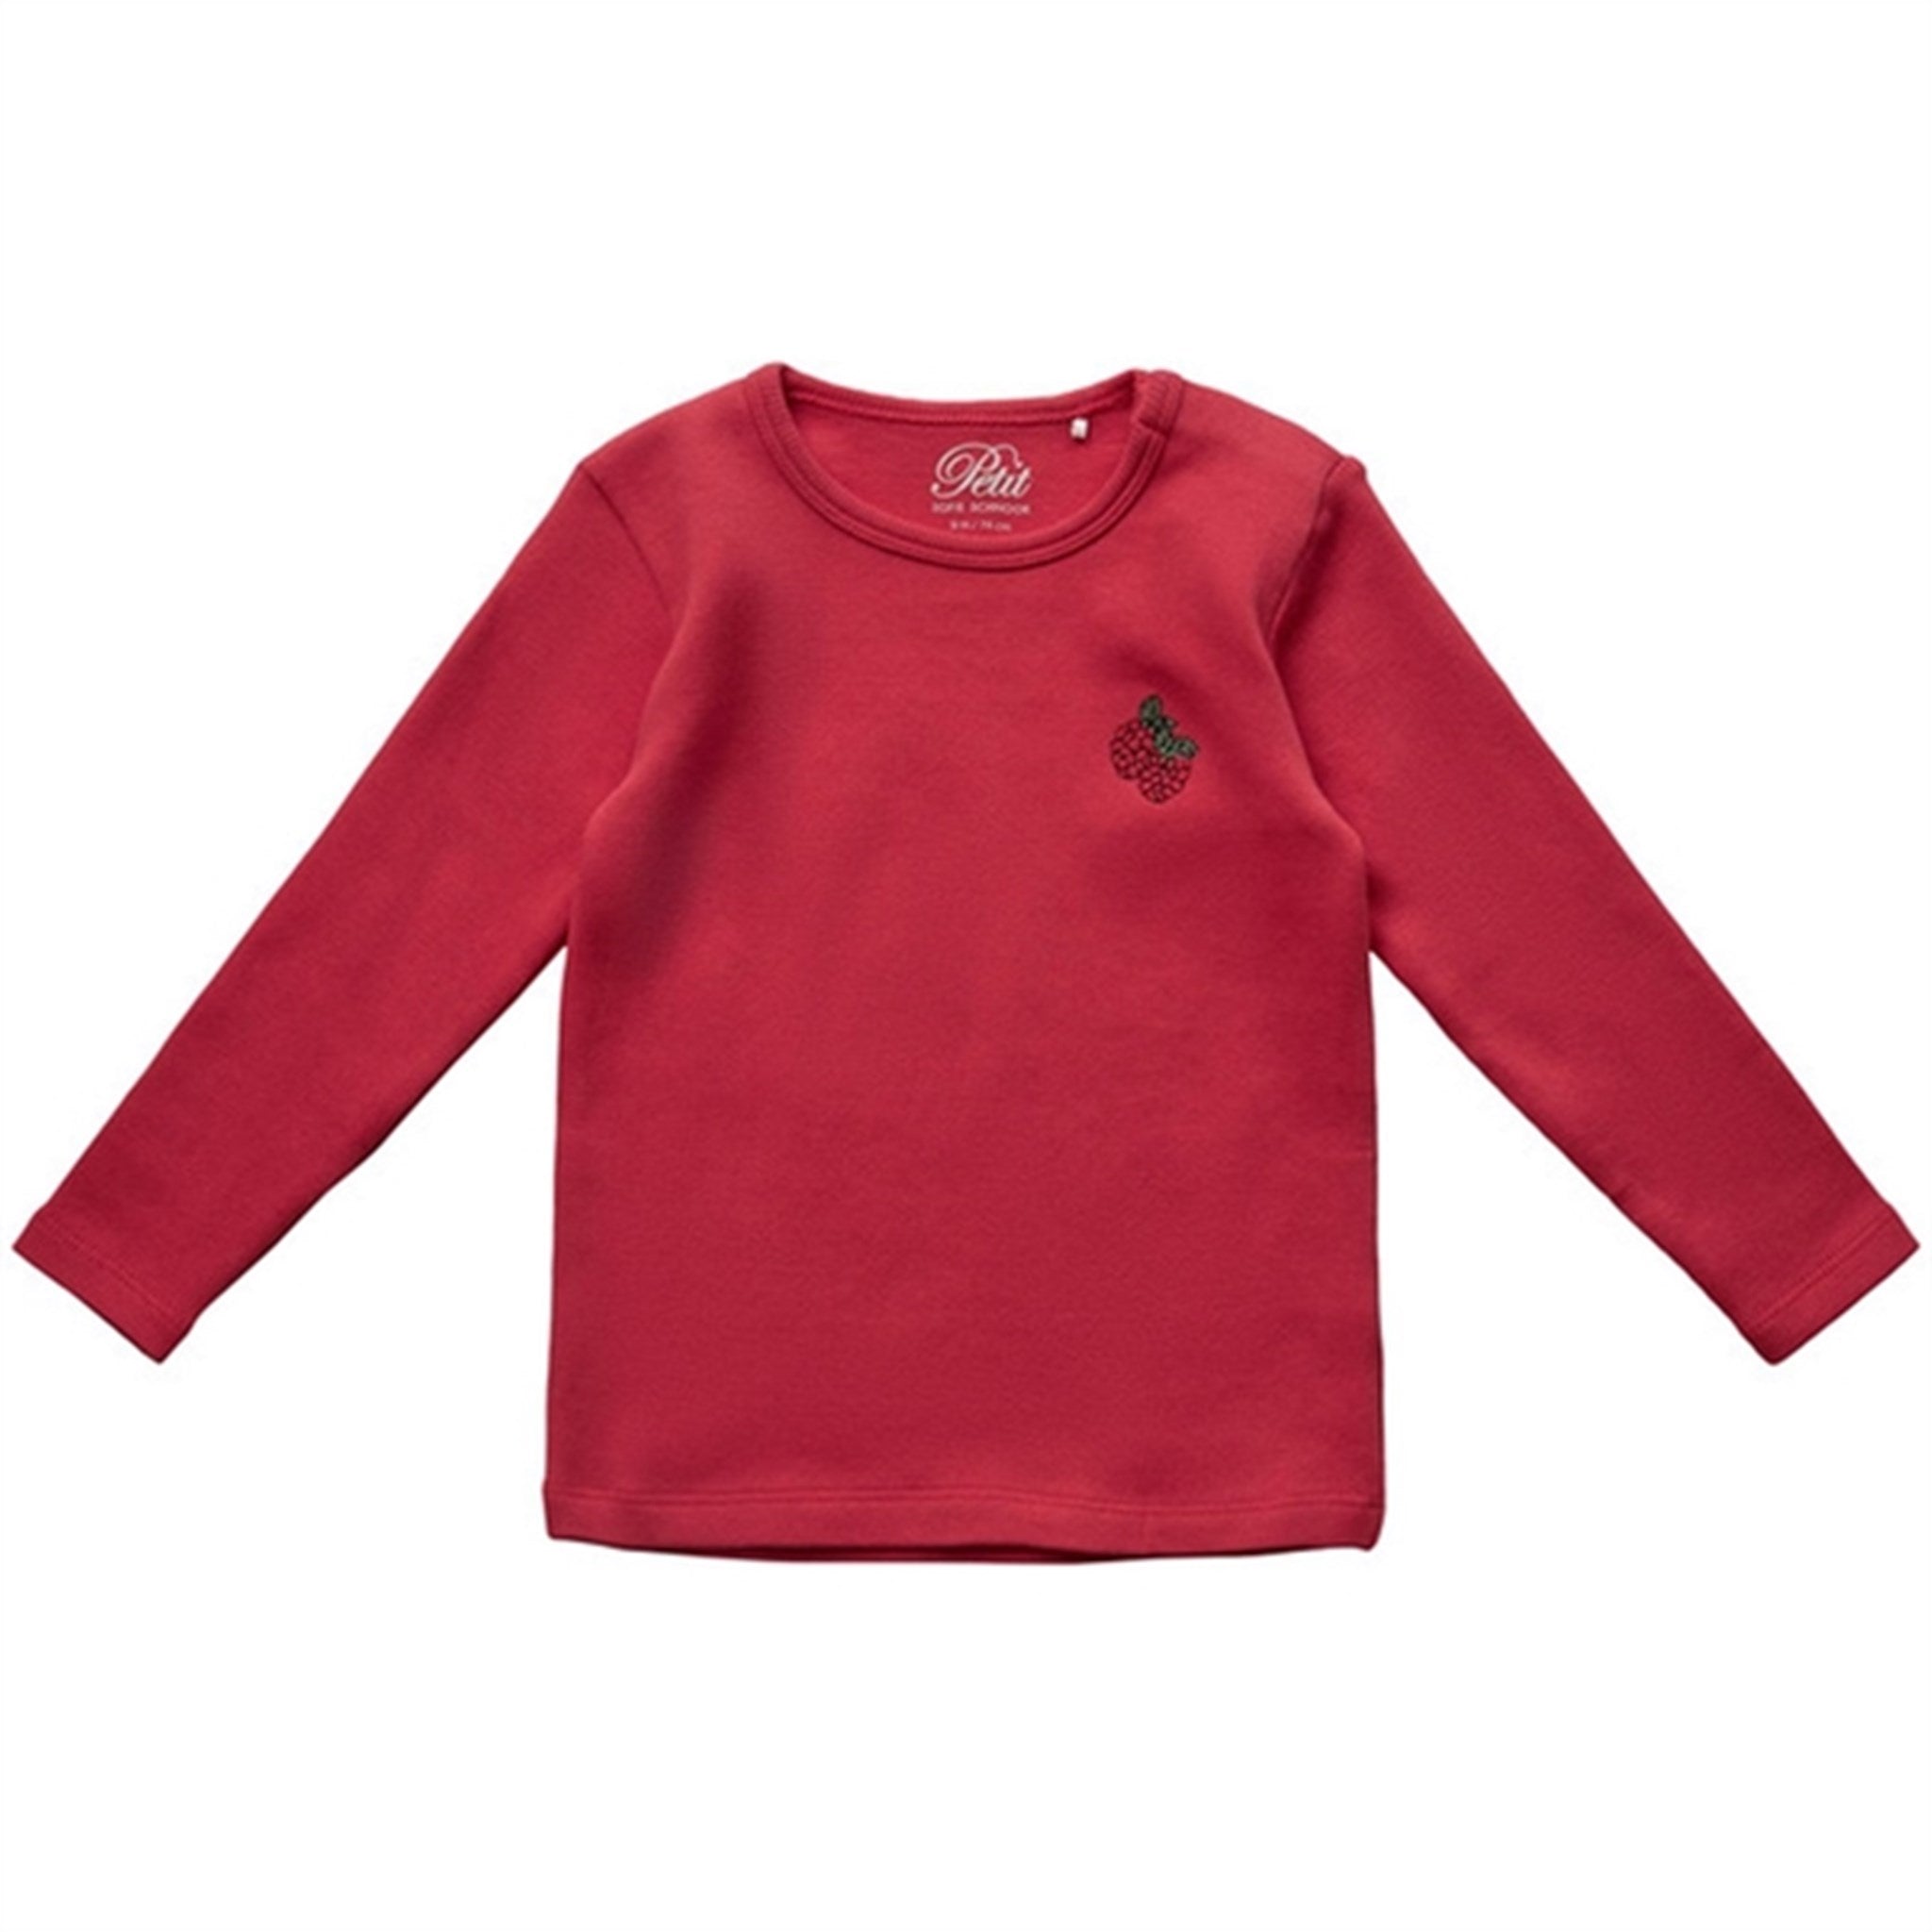 Sofie Schnoor Berry Red Bluse